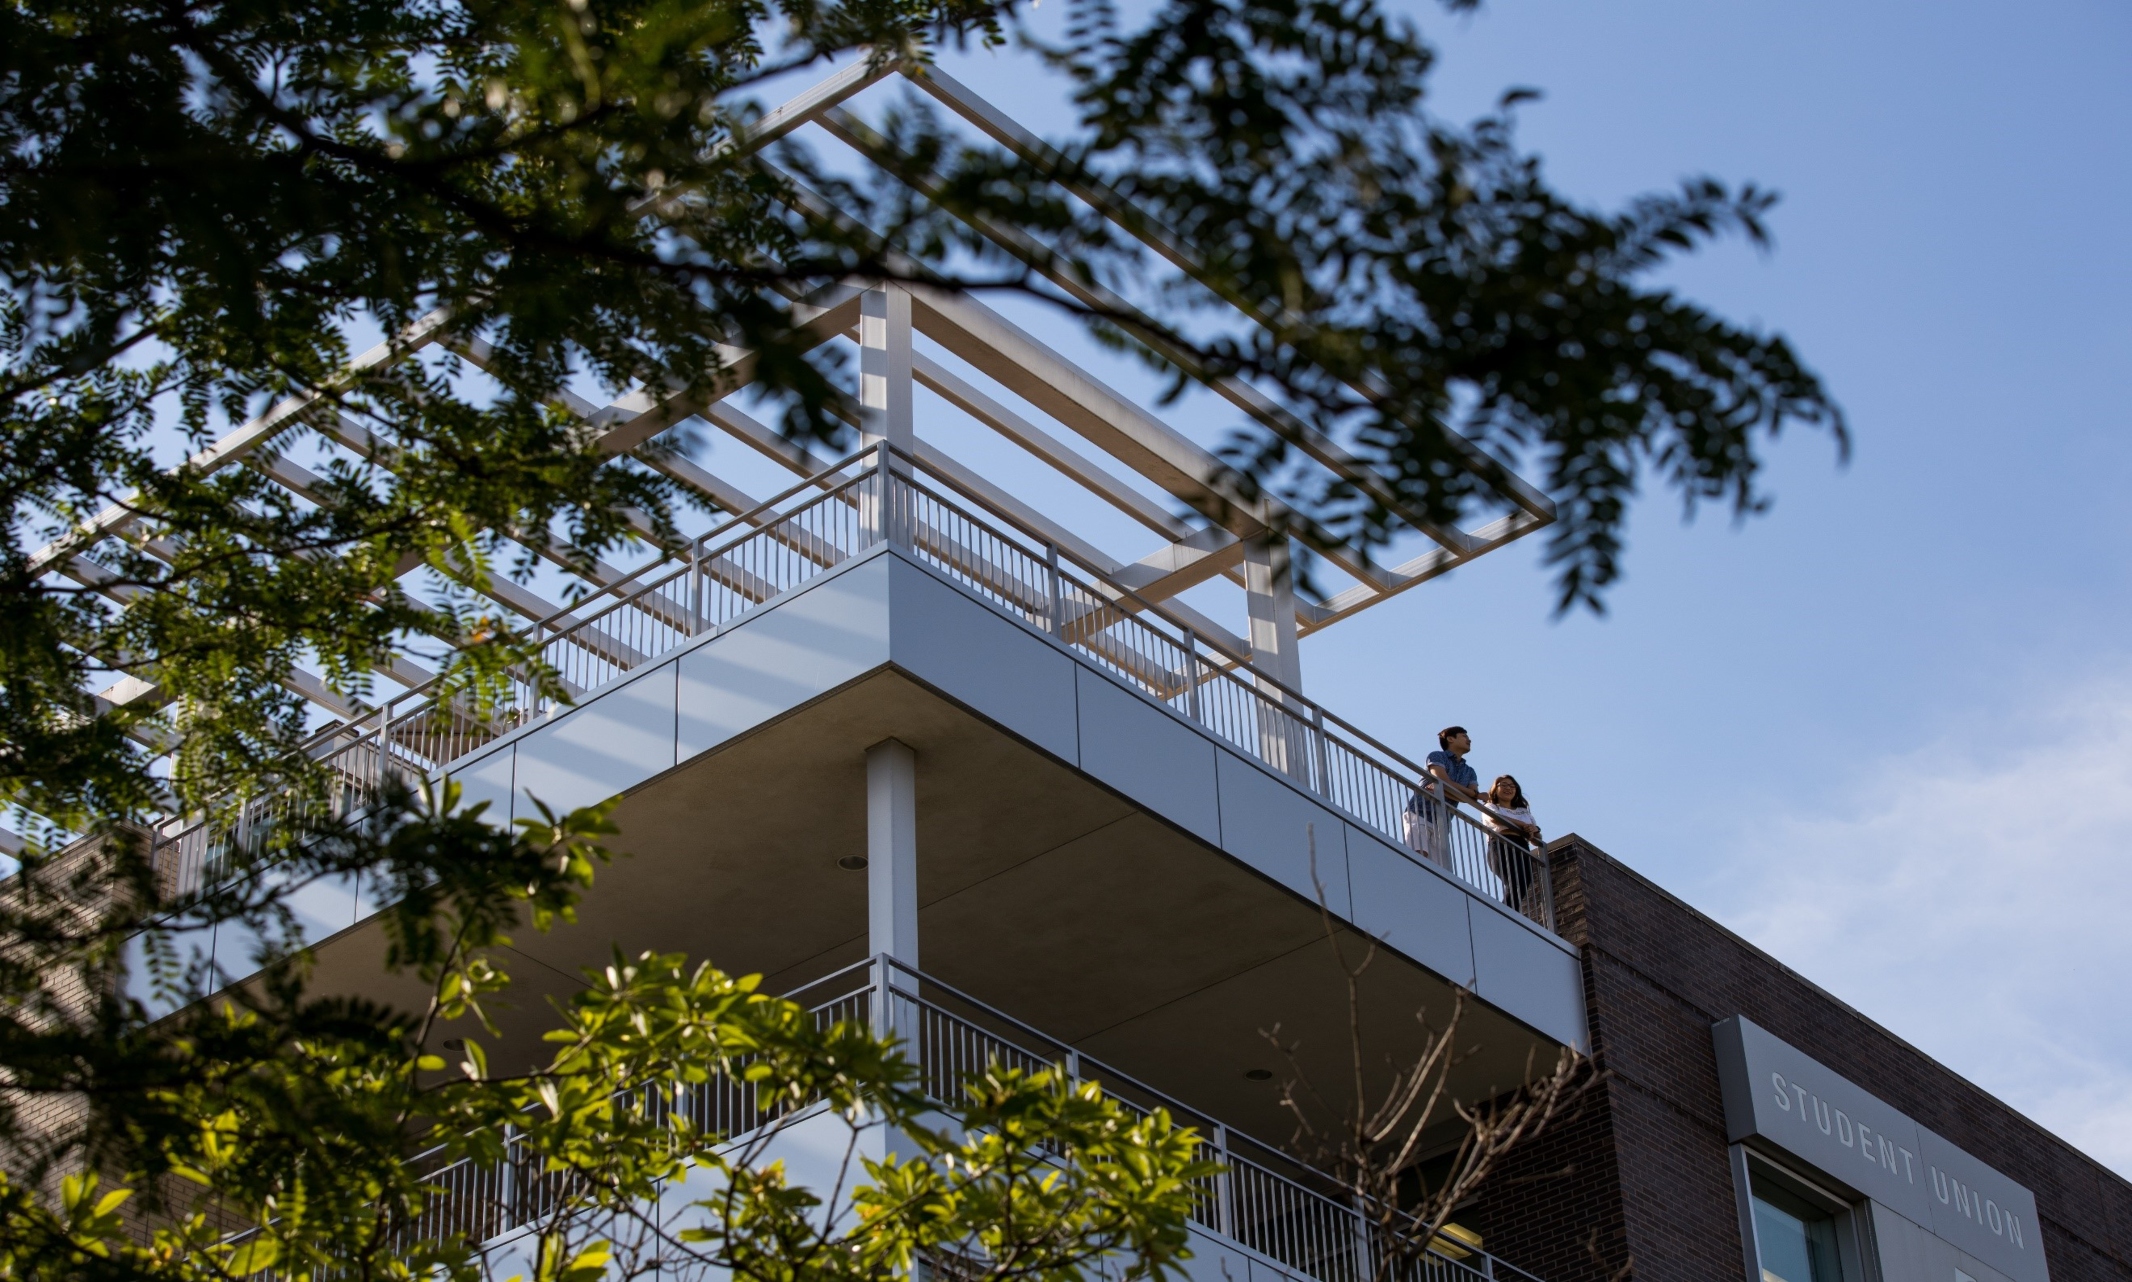 A view looking up at the Student Union rooftop